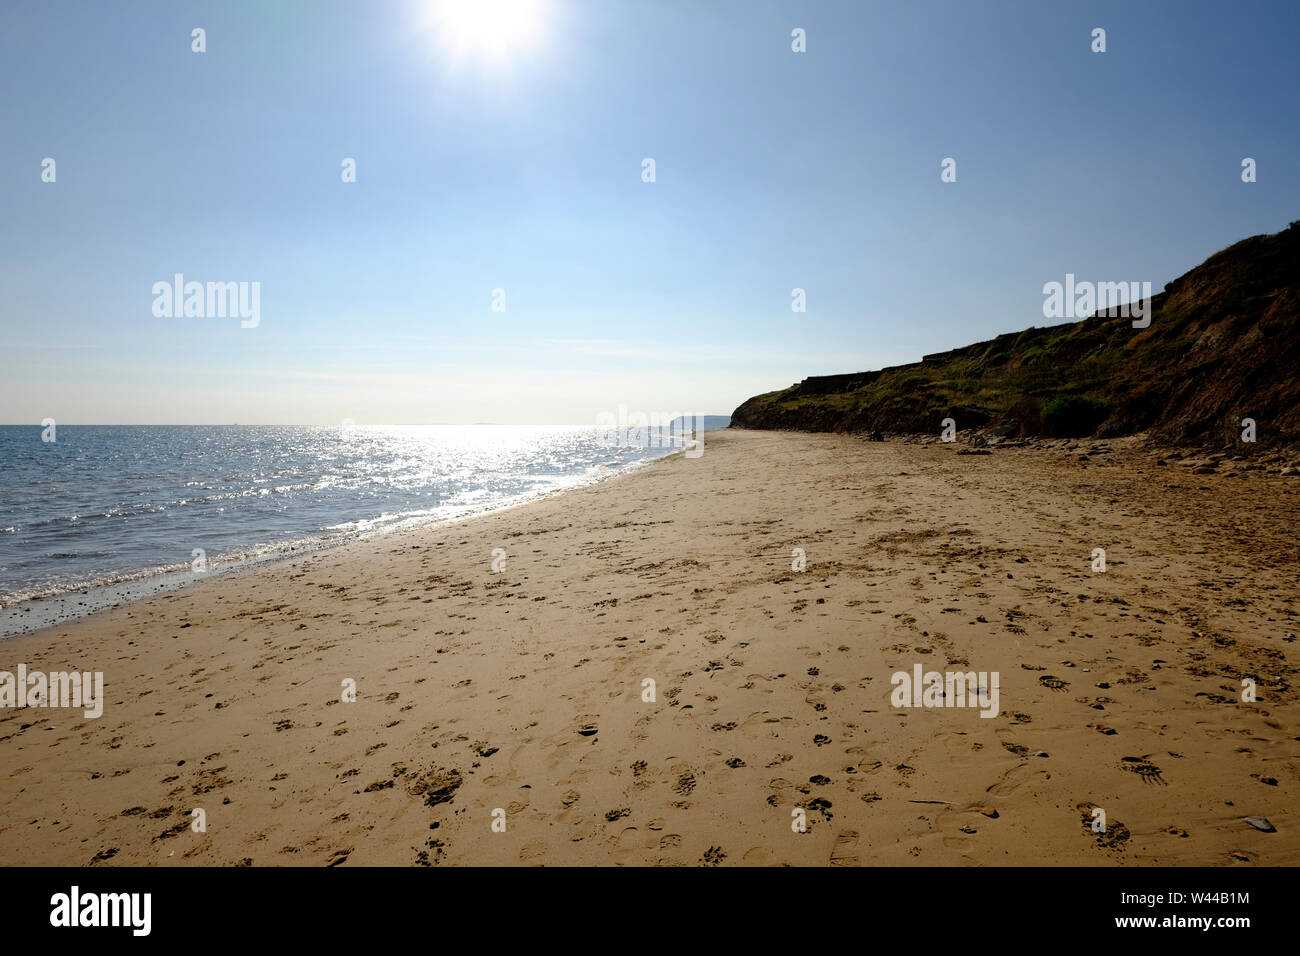 View at low tide on a calm sunny day along the sandy beach at Chilton Chine, Compton Bay, Isle of Wight Stock Photo